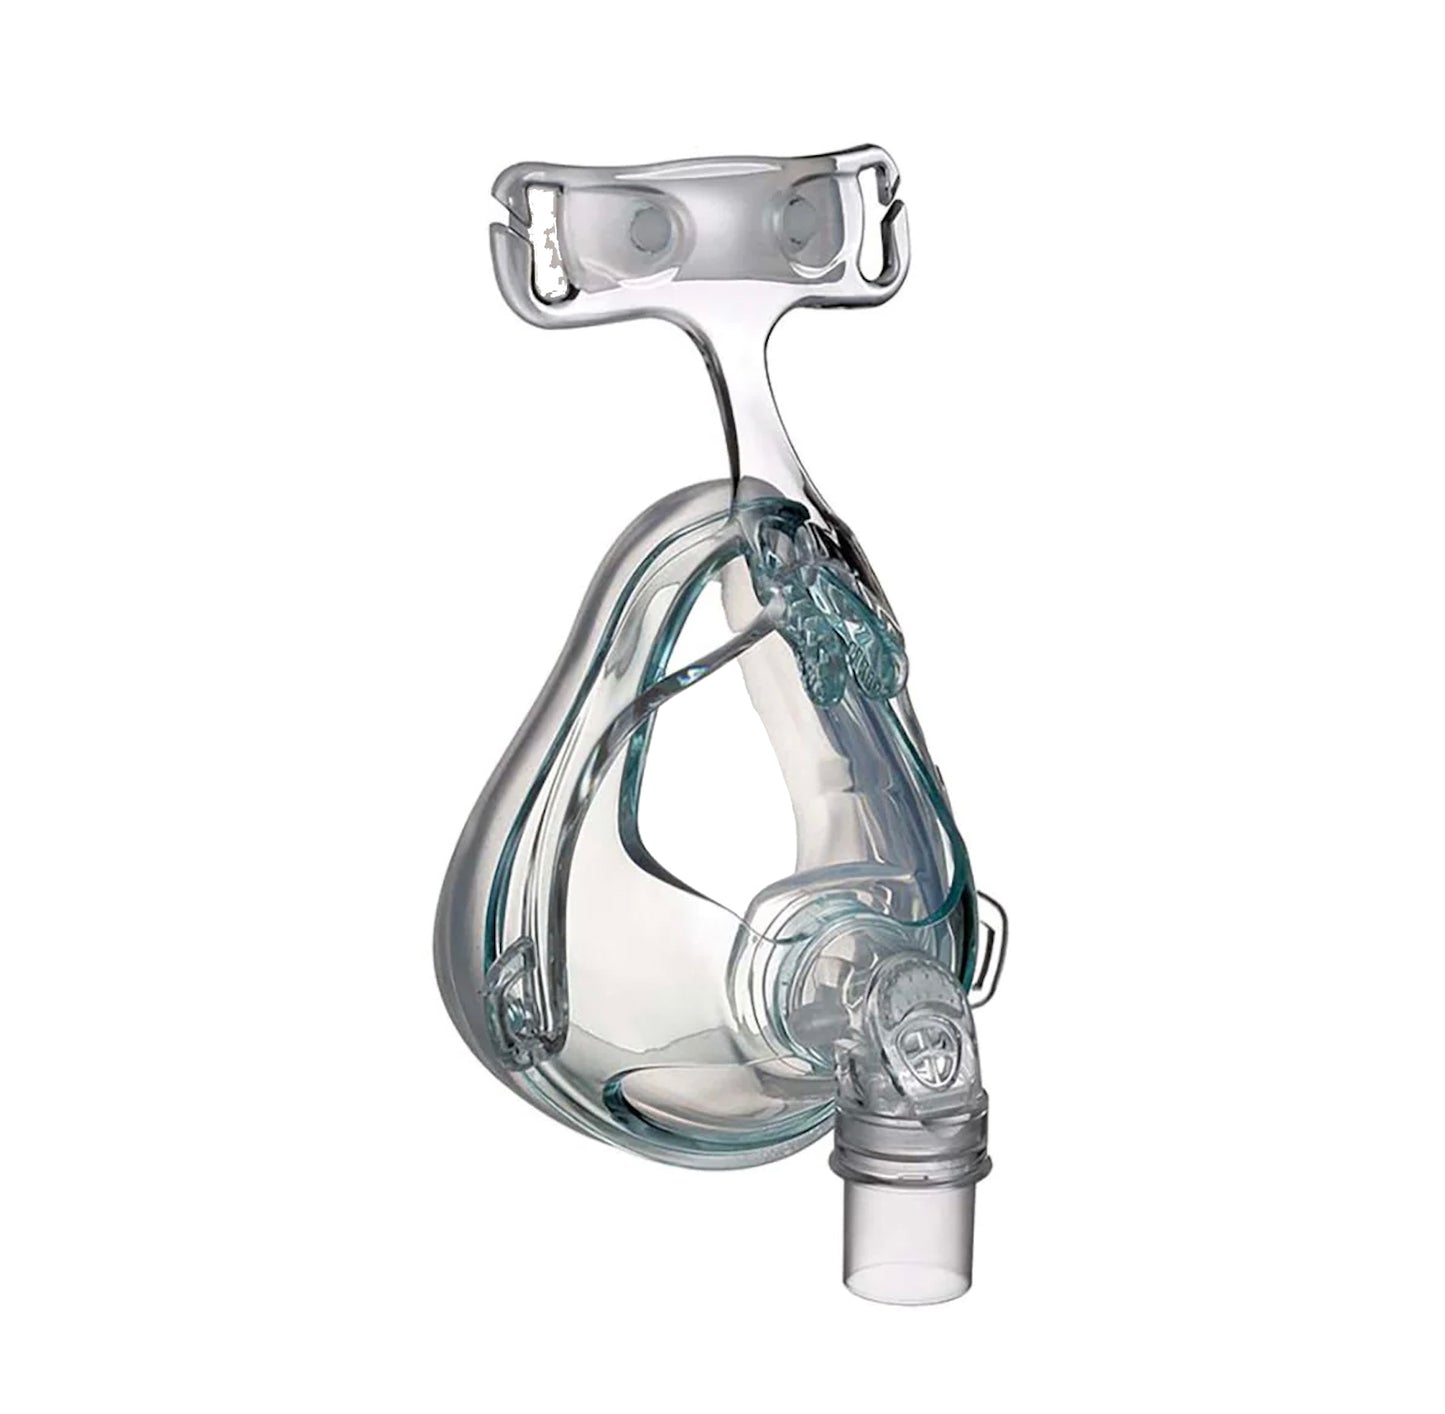 Hoffrichter Cirri Comfort mouth-nose mask NIPPV - incl. headband and mask cushion, available in S, M or L - Full Face CPAP Mask - without valve (NV) for non-invasive ventilation 